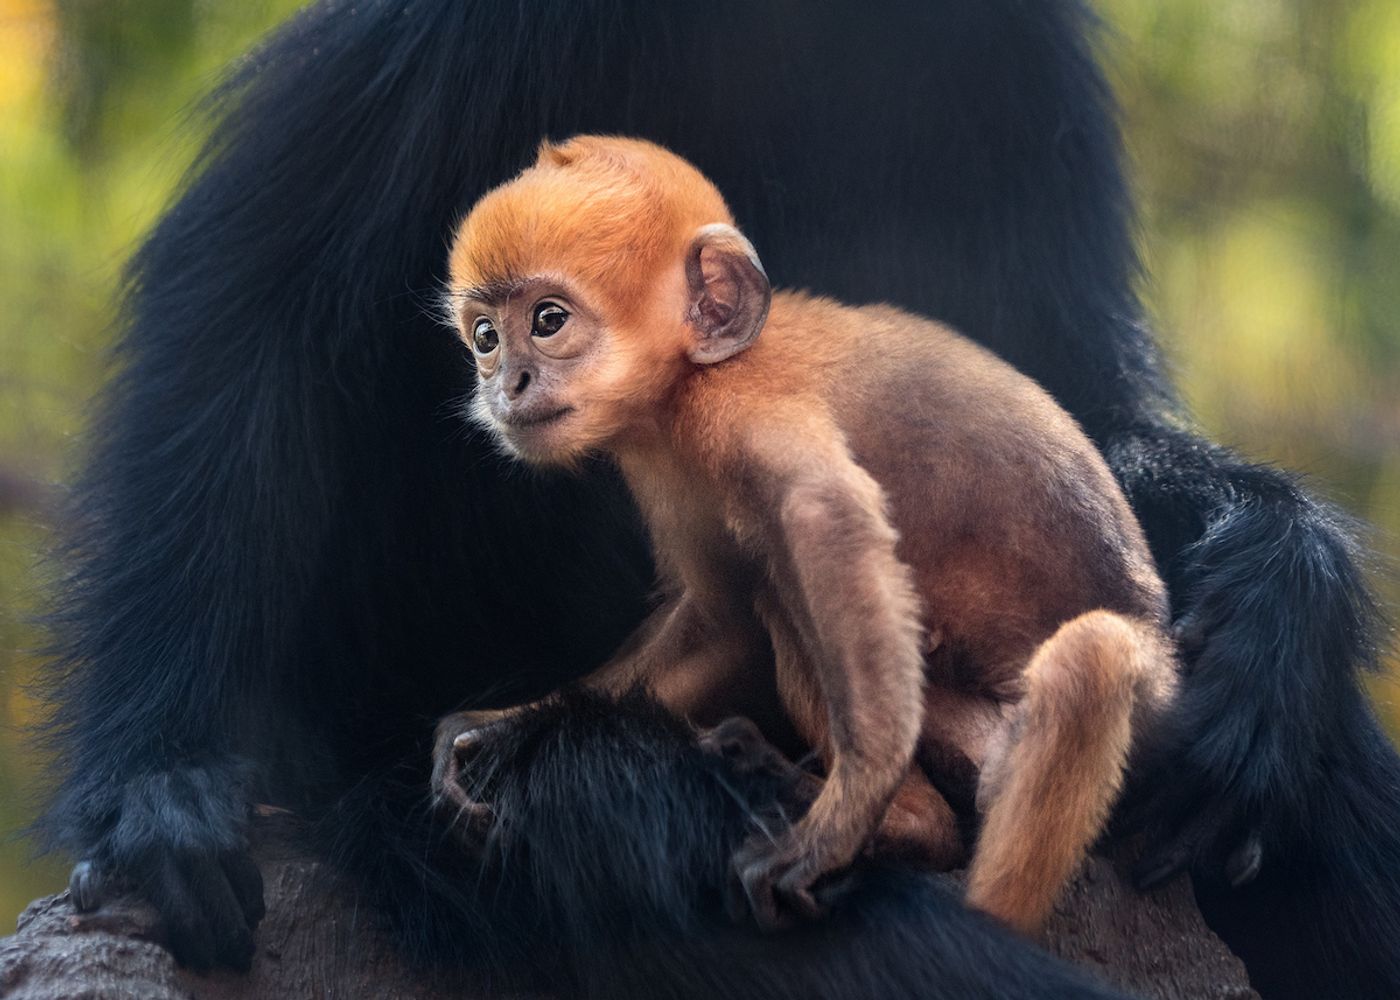 One of the monkeys born at the Los Angeles Zoo earlier this Summer.